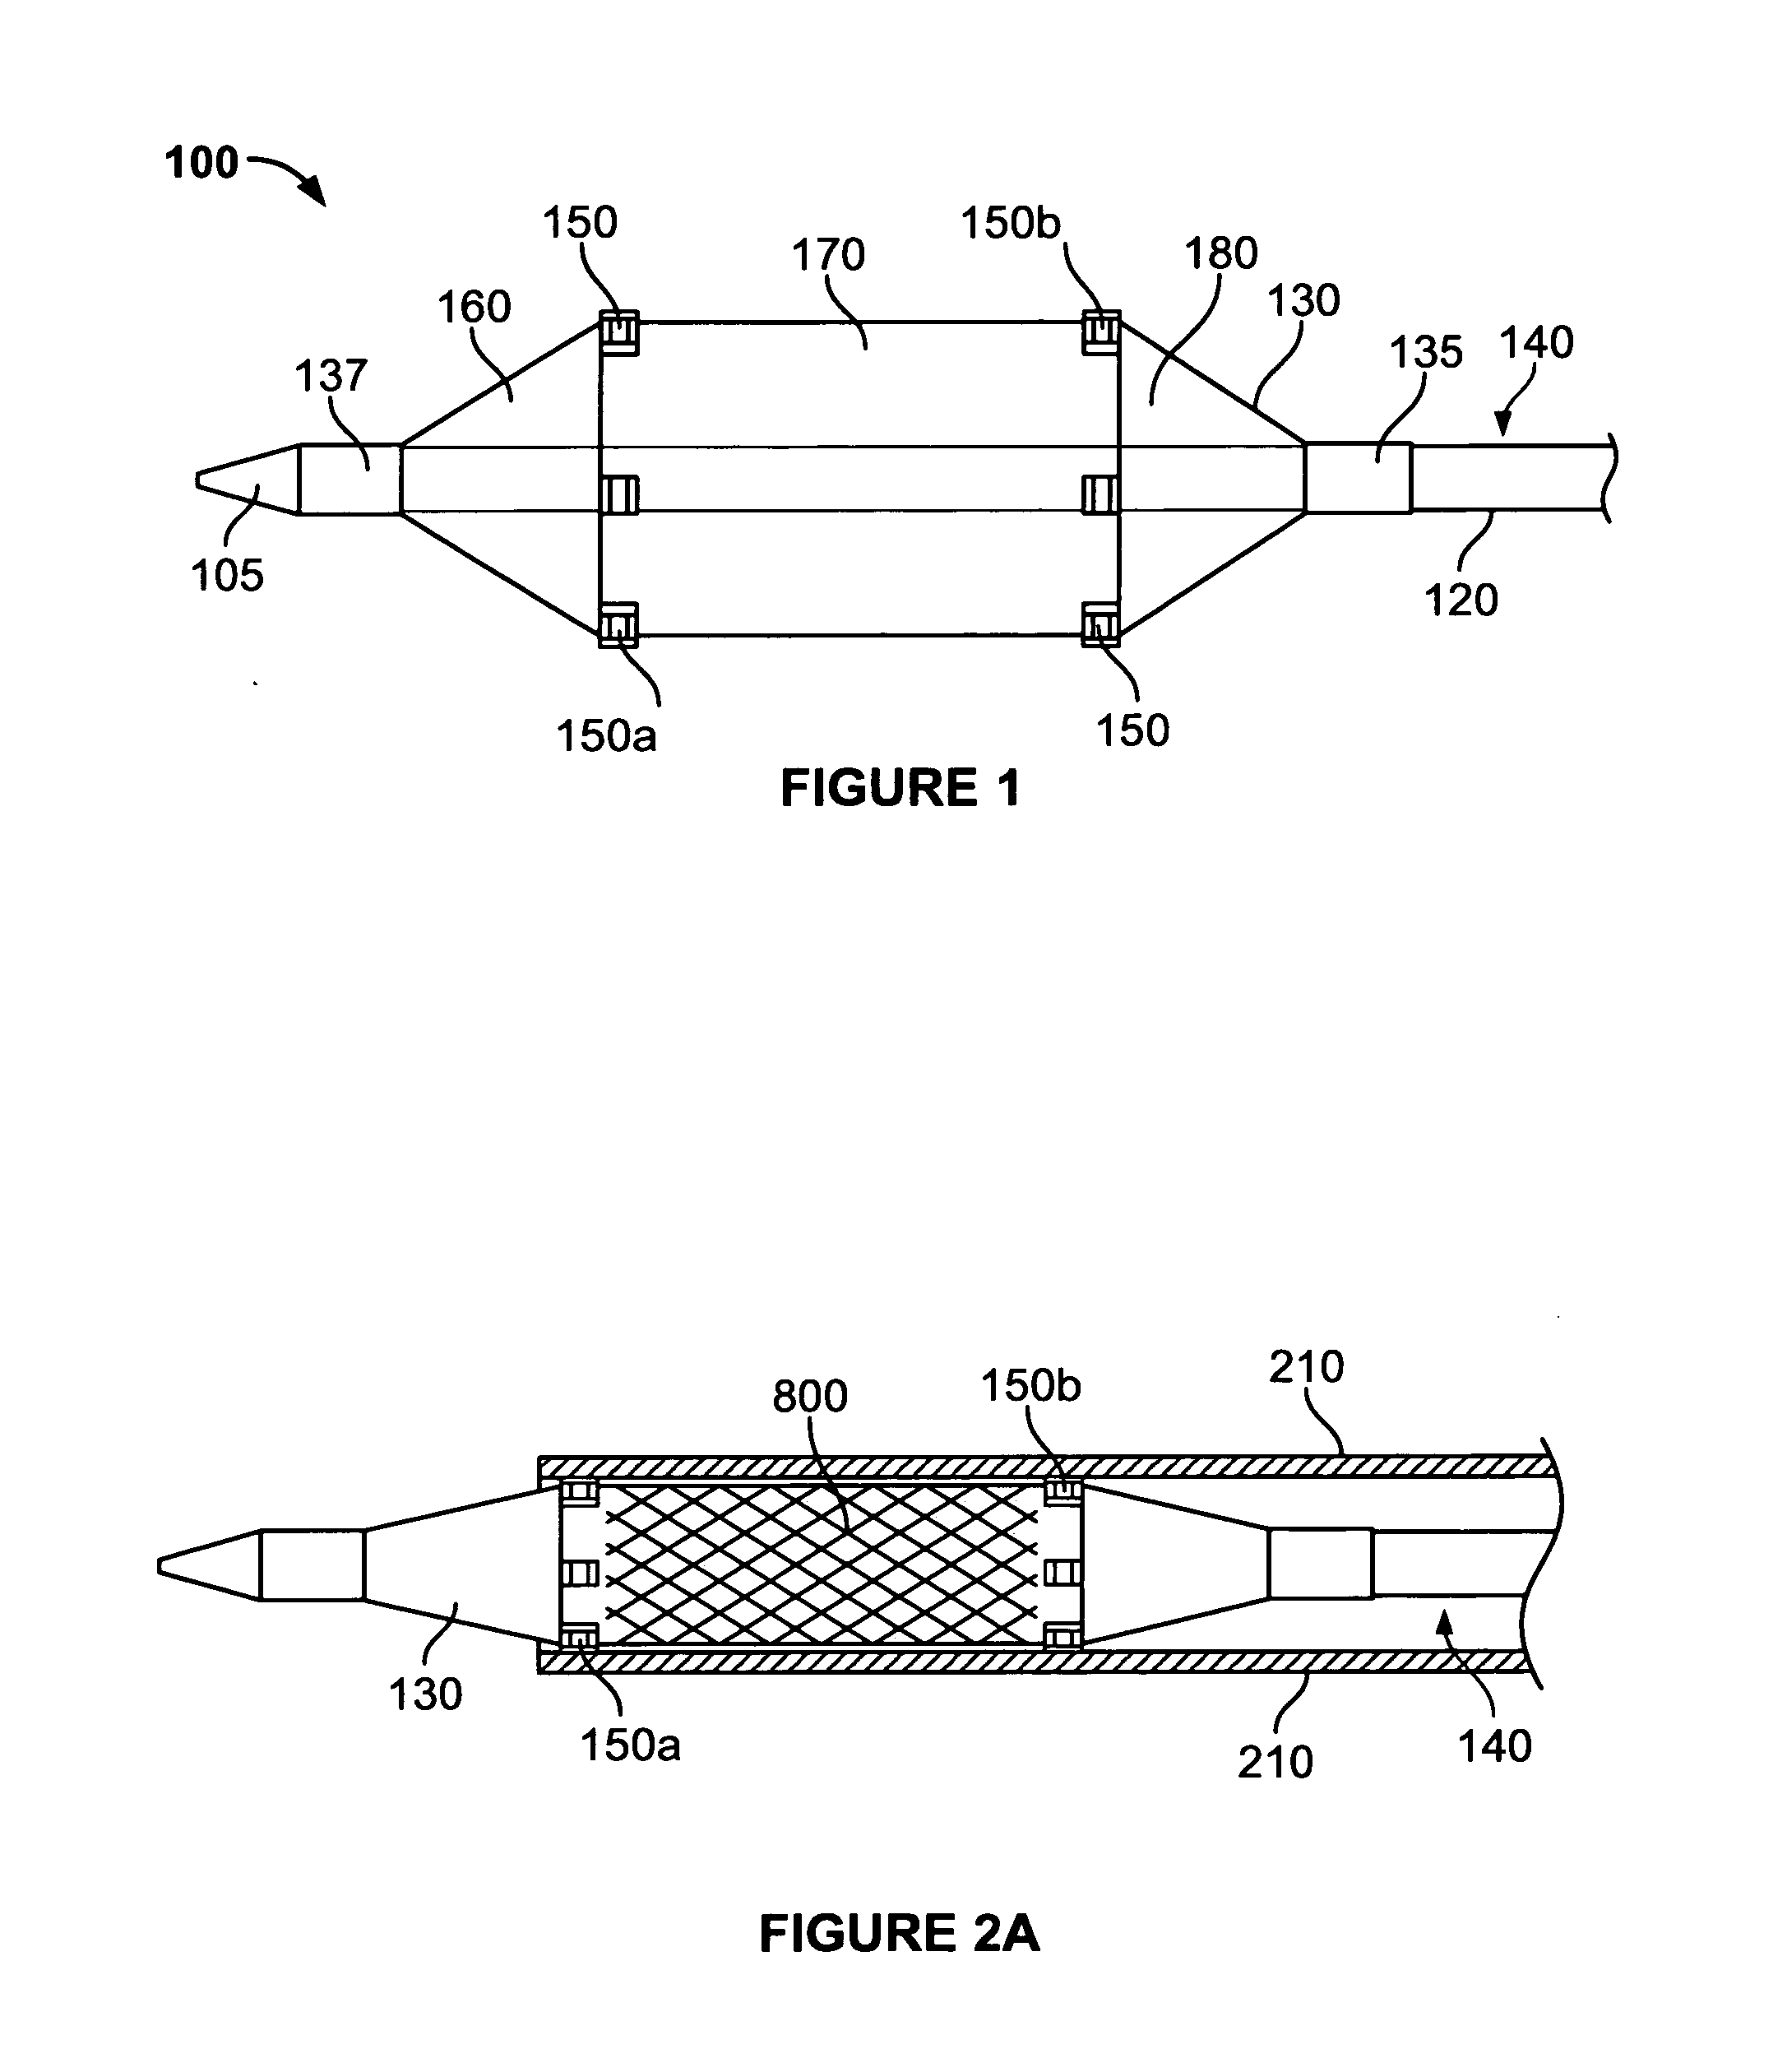 Balloon expandable platform with retaining features for a collapsible valve